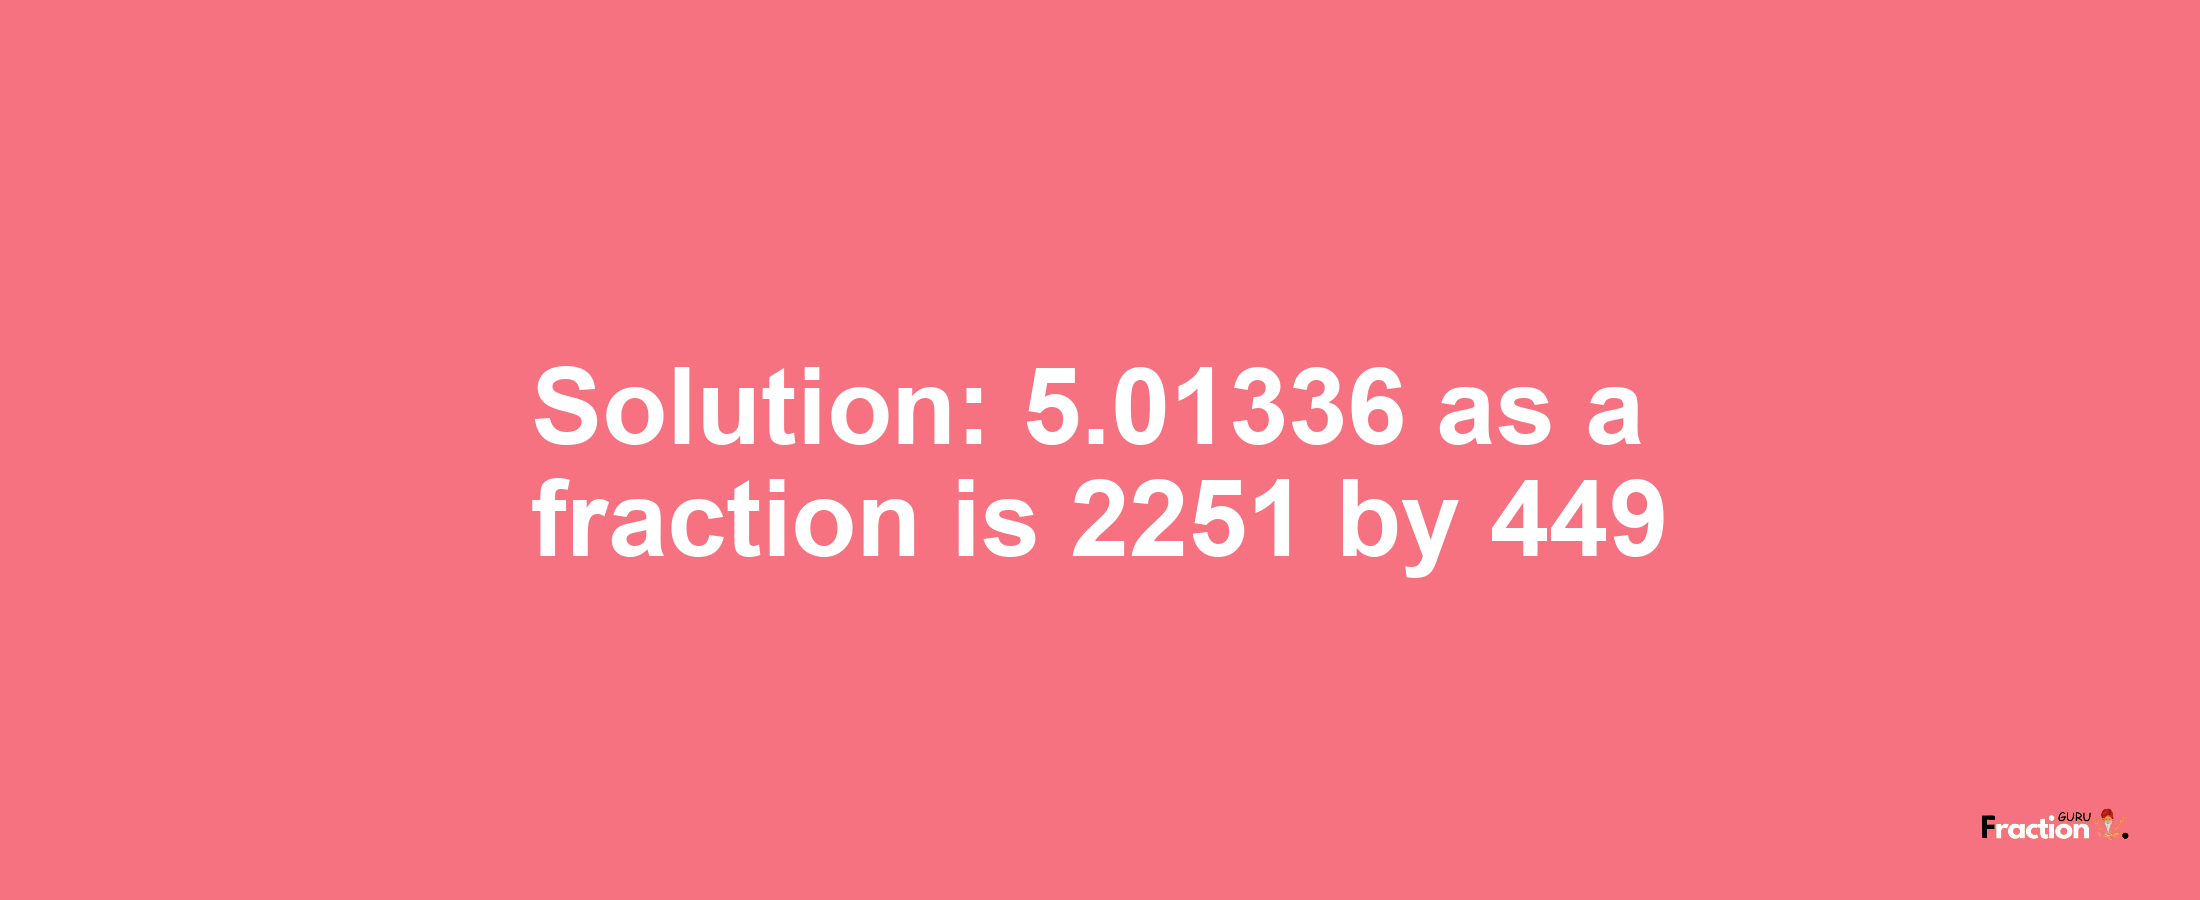 Solution:5.01336 as a fraction is 2251/449